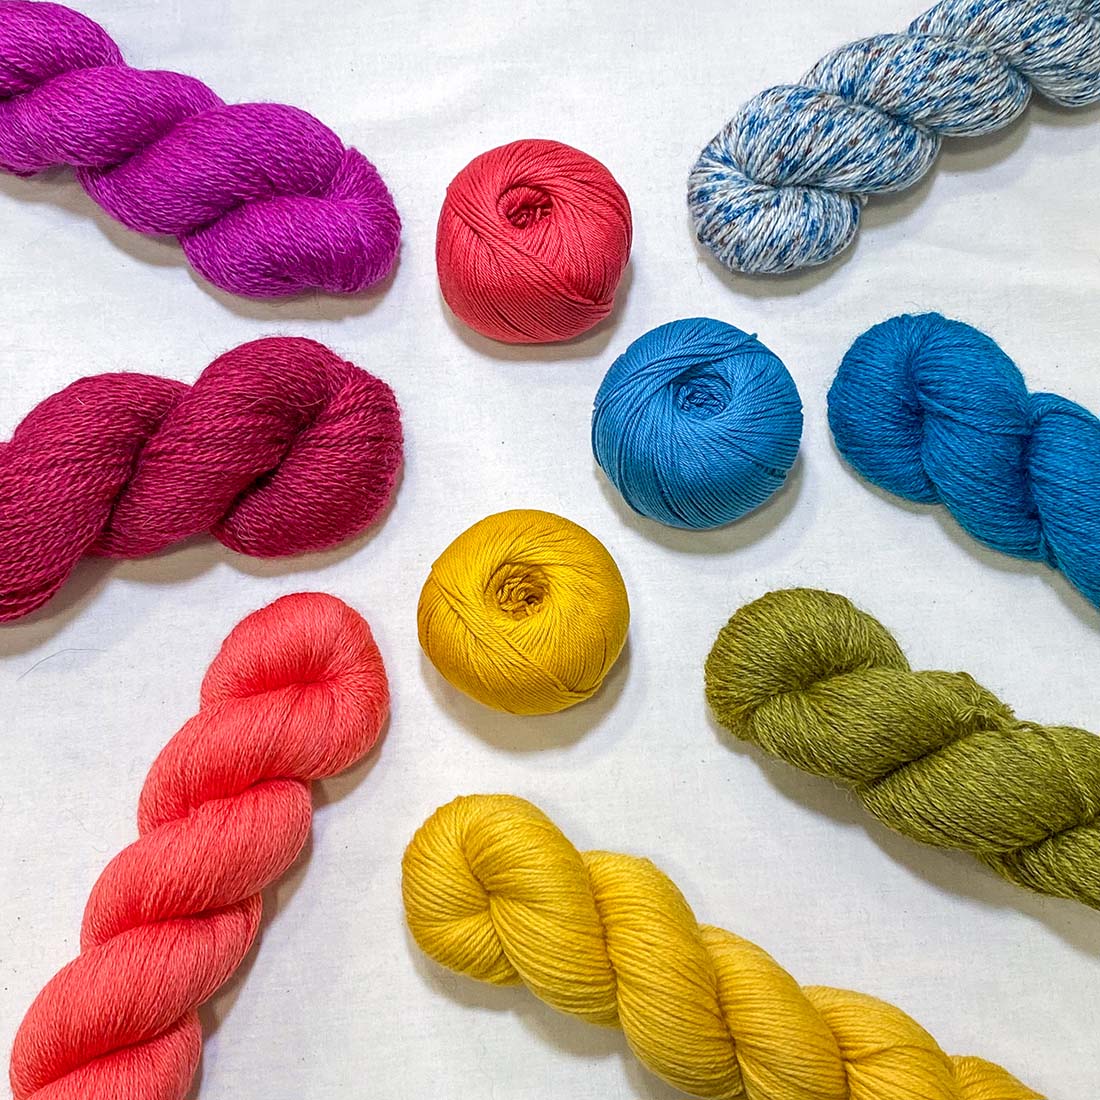 Colourful selection of yarn balls and hanks in cotton and wool